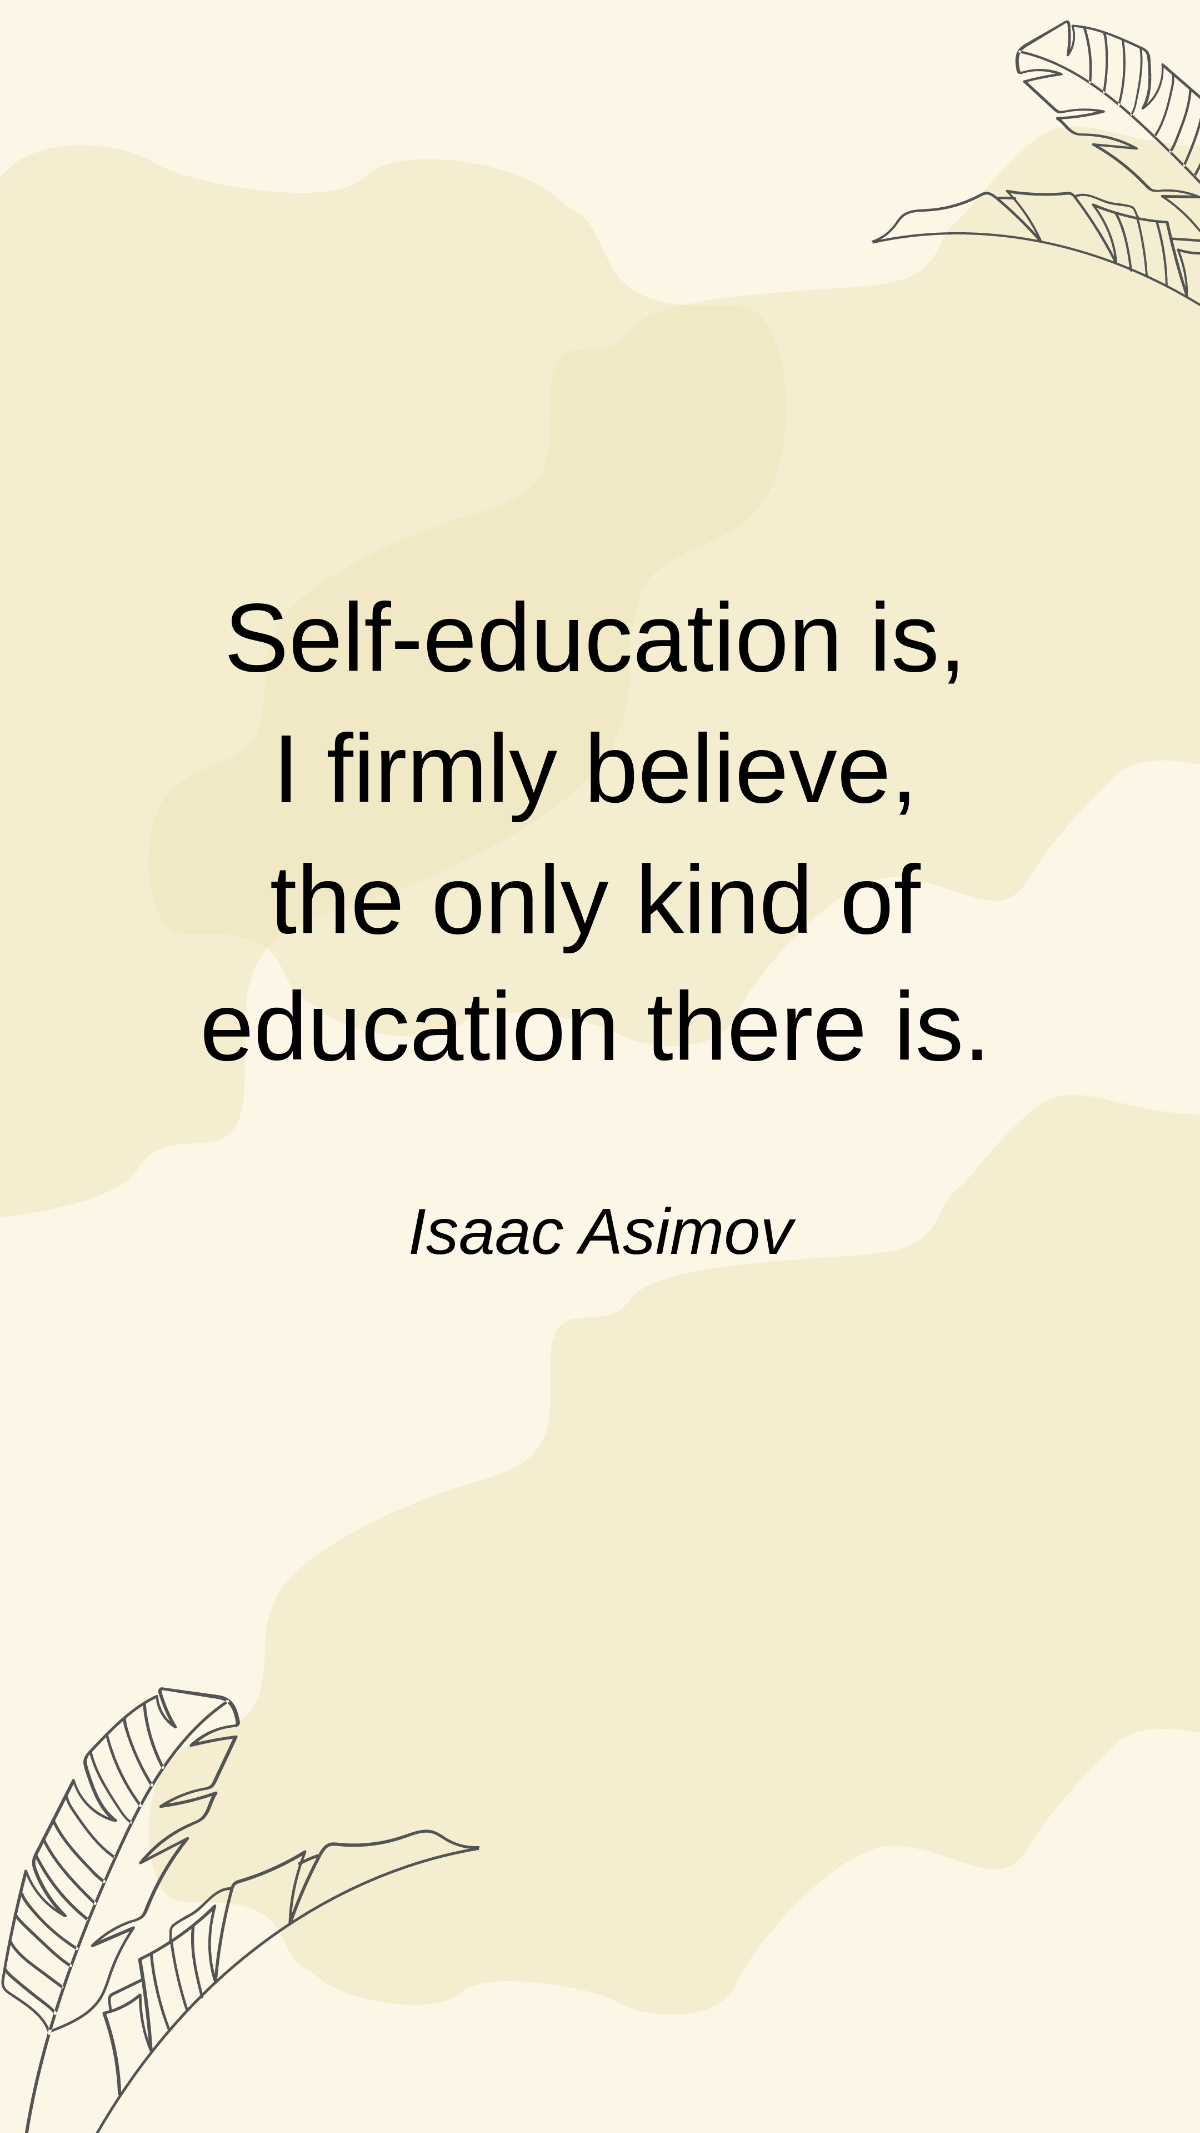 Free Isaac Asimov - Self-education is, I firmly believe, the only kind of education there is. Template